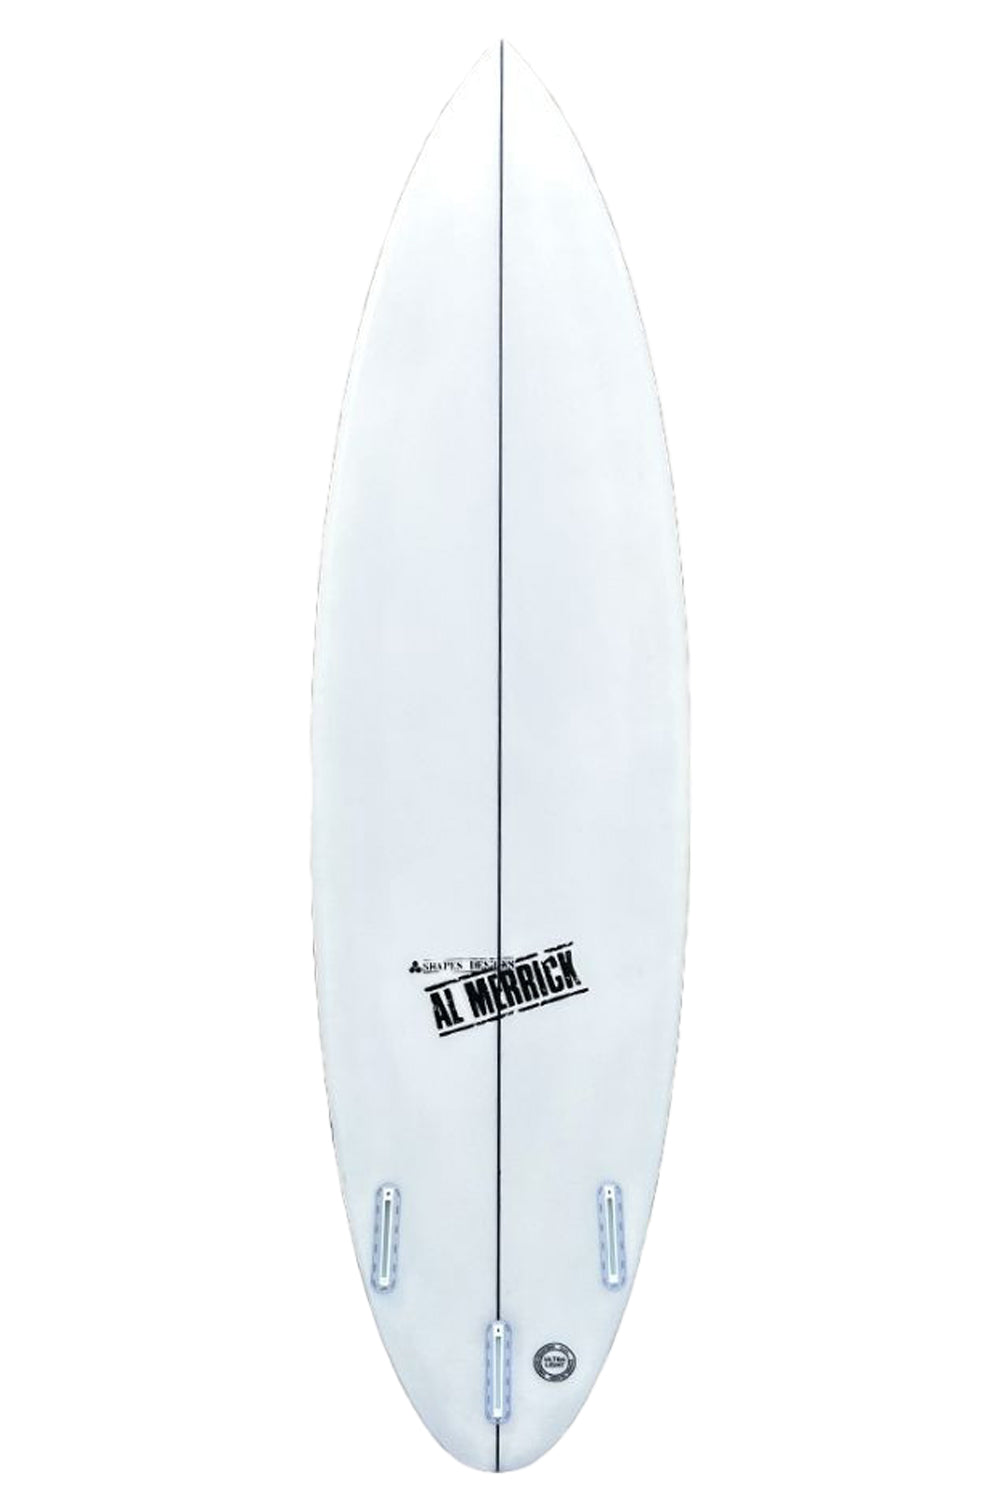 Channel Islands CI 2.Pro Step Up Surfboard